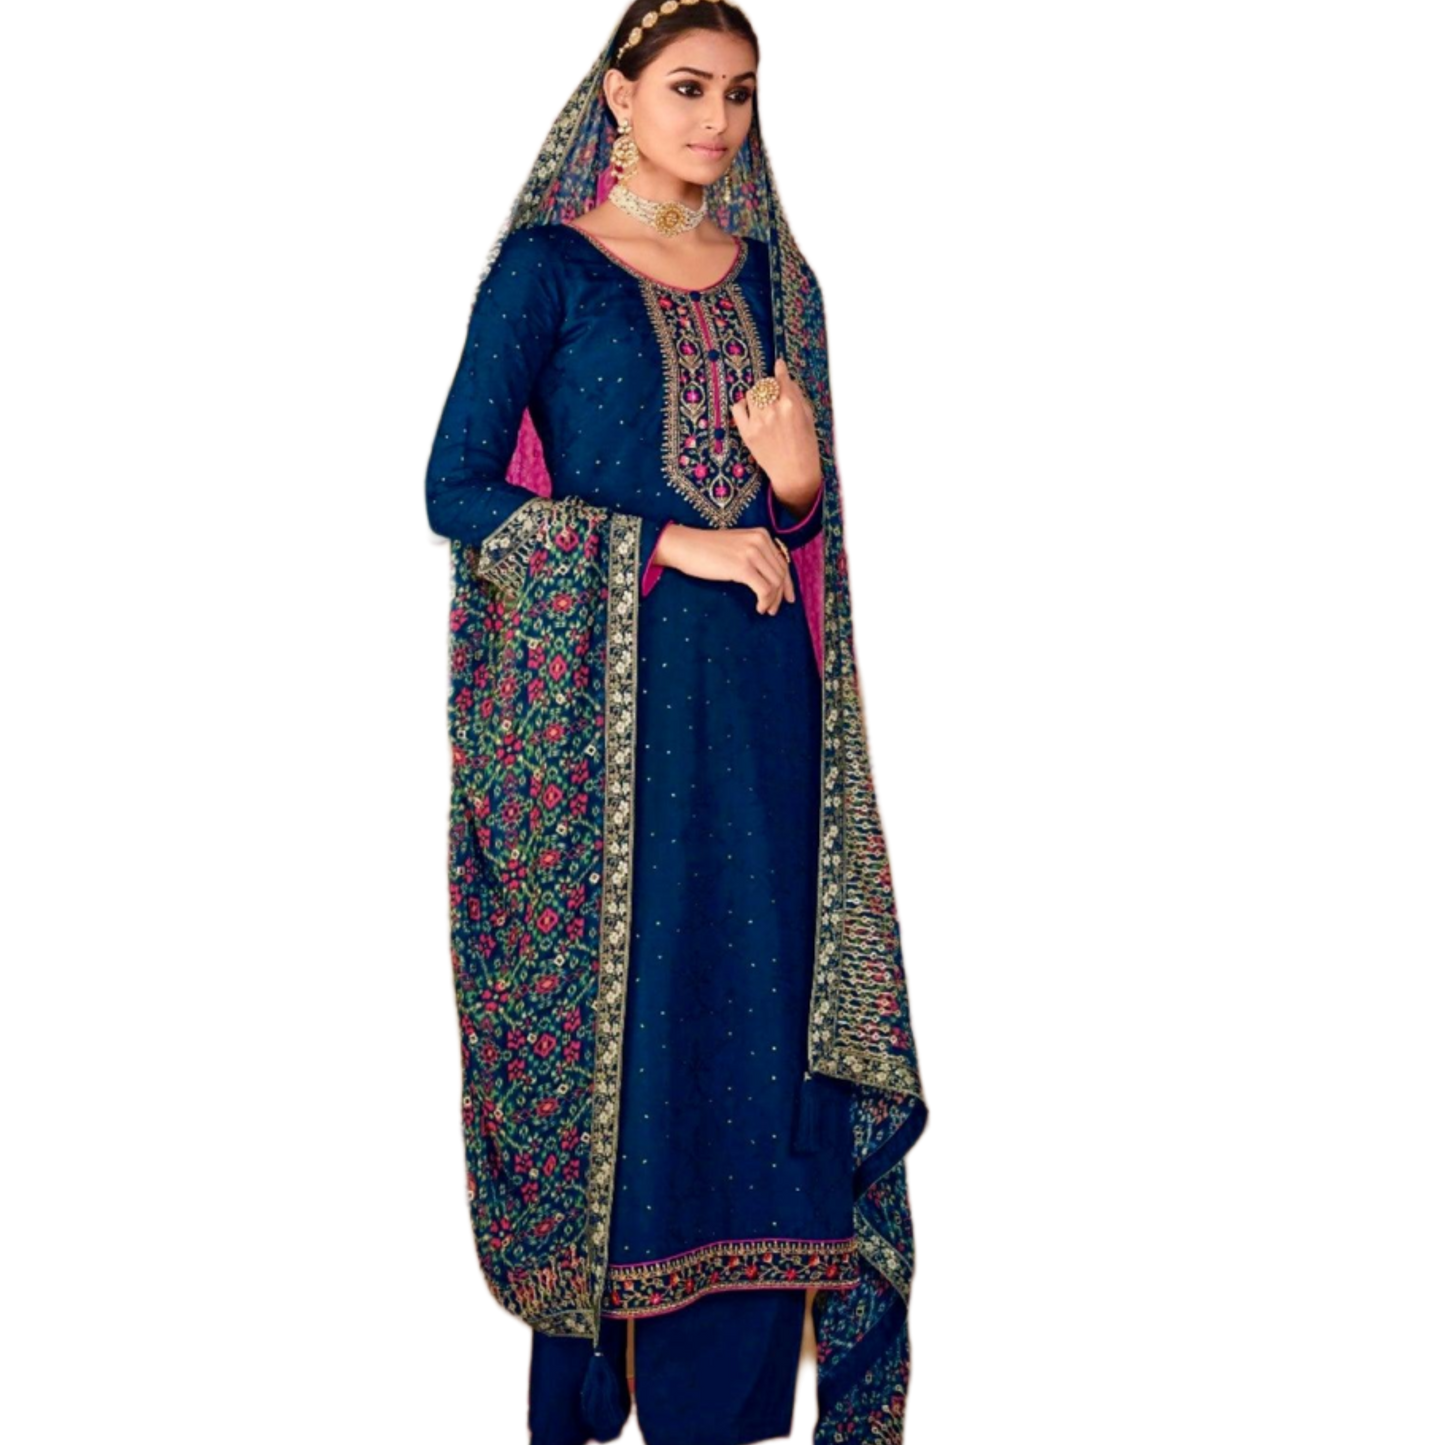 Women’s Round Neck Indian Dola Silk with embroidery sequins works dress, Party wear Salwar kamiz suit dress with Dupatta, M L